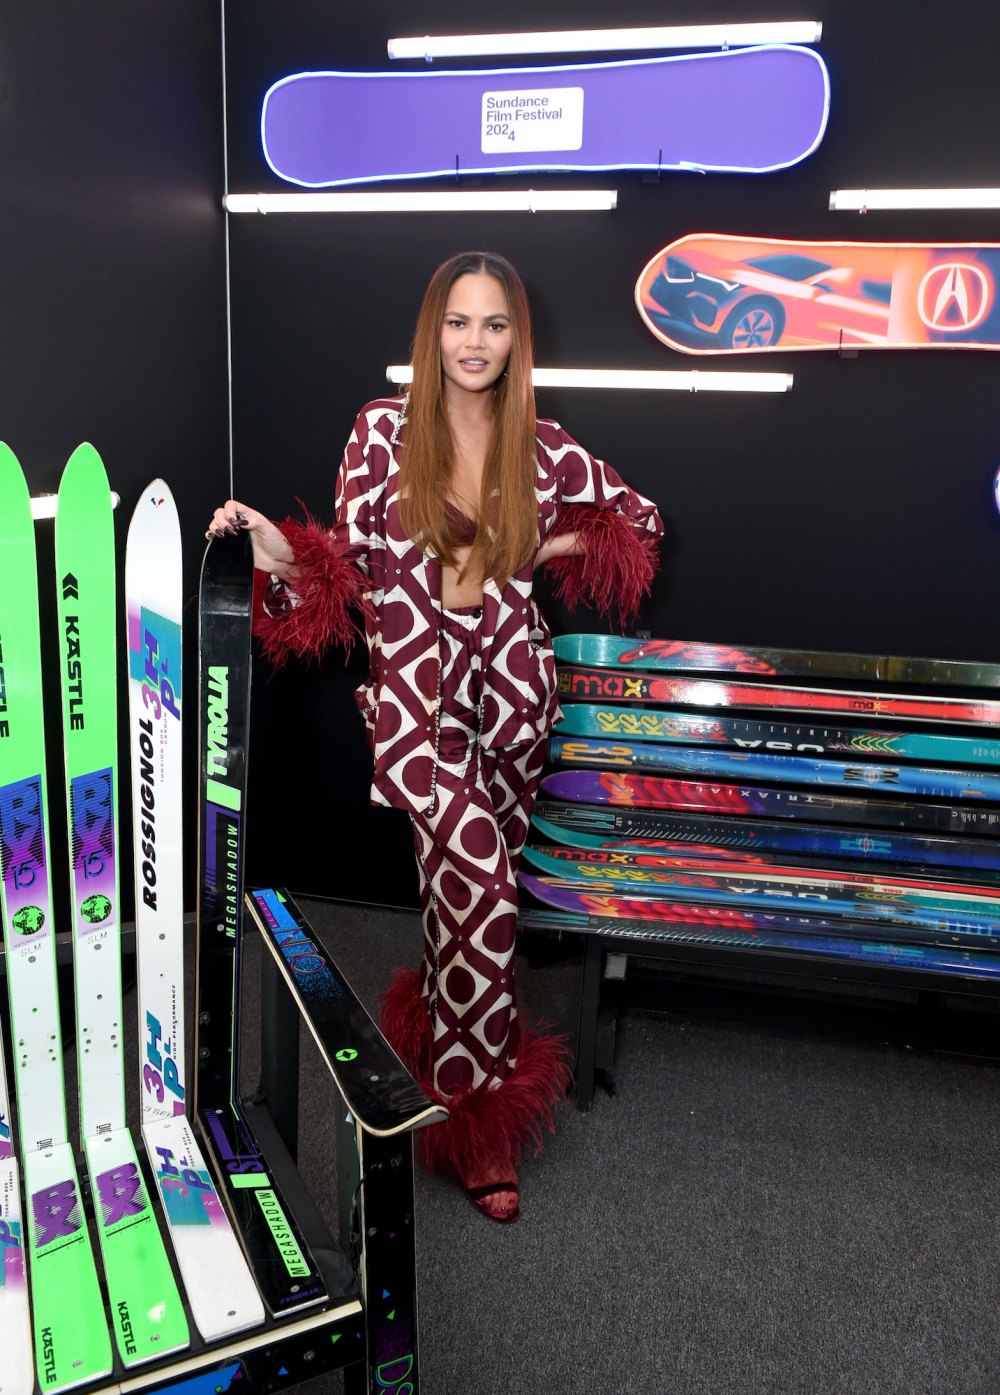 Chrissy Teigen Pairs Embellished Gucci Pajamas With Heels at Sundance Film Festival